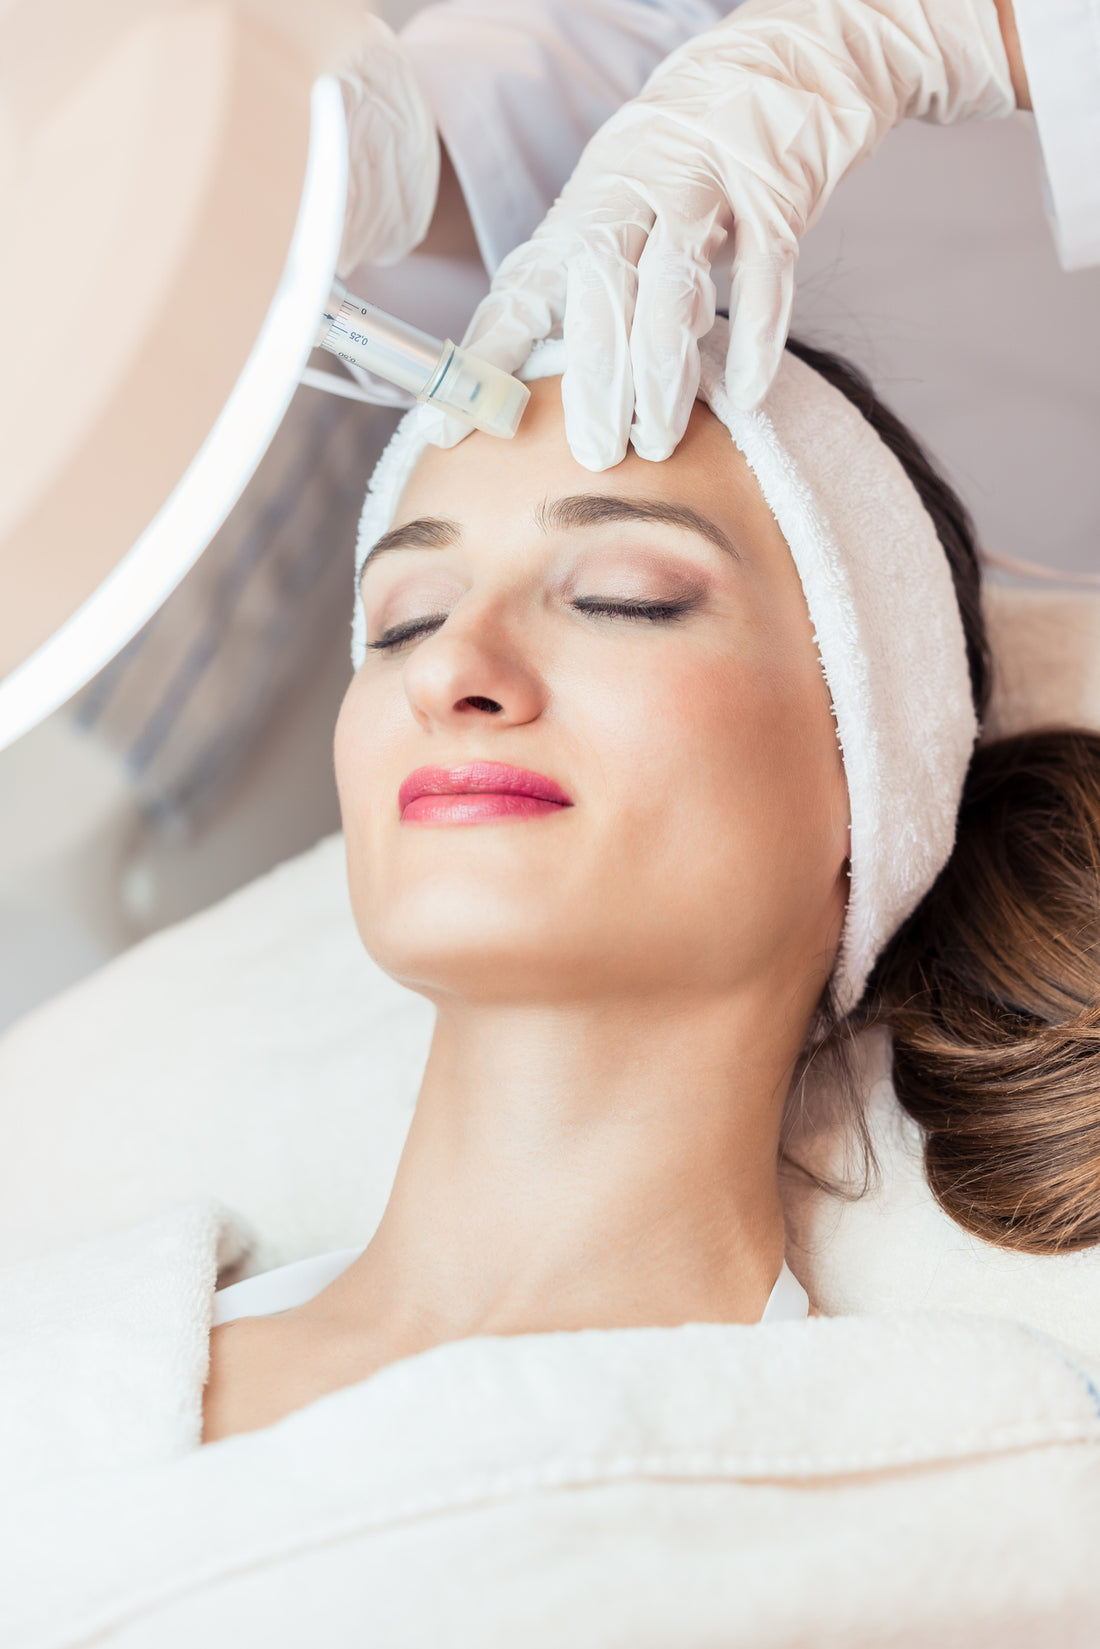 The Best Medical Supplies for Beauty Treatments